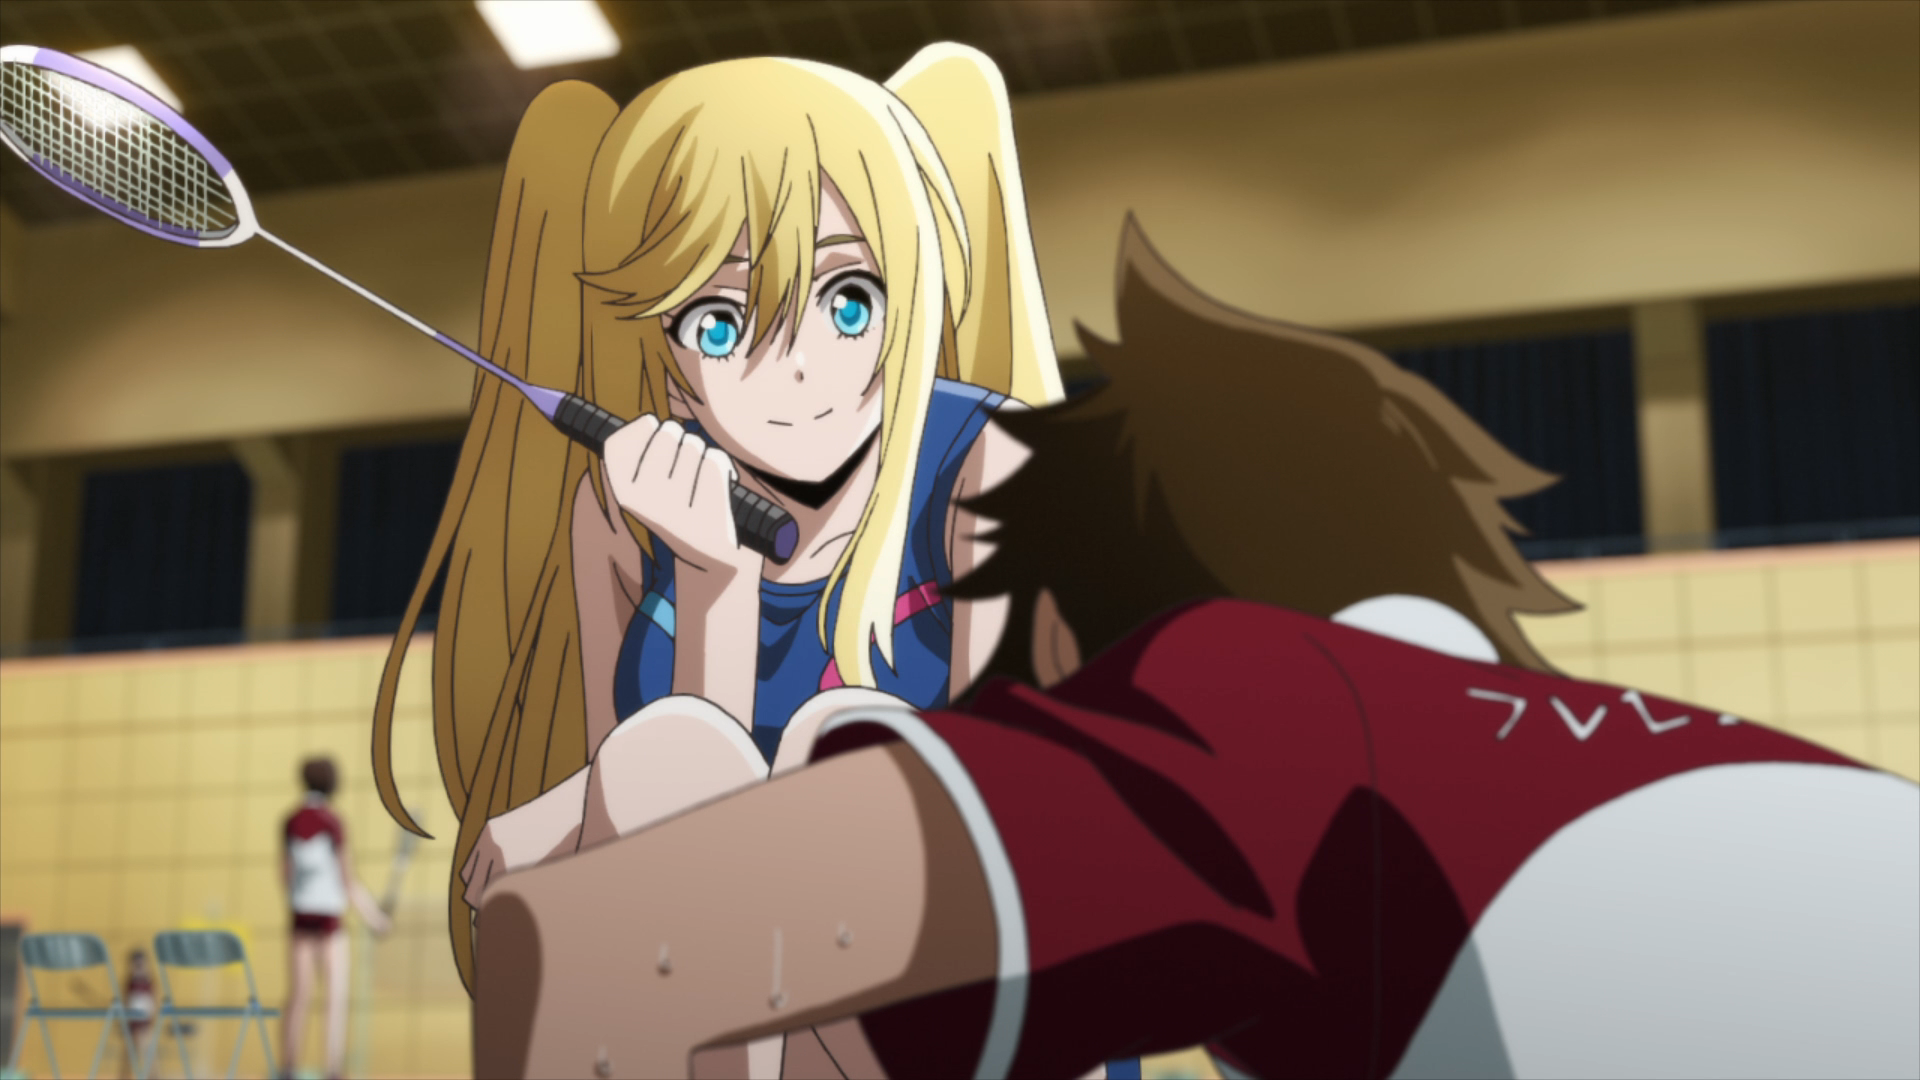 Here are the 7 Beautiful Female Badminton Players from Hanebado! | Dunia  Games